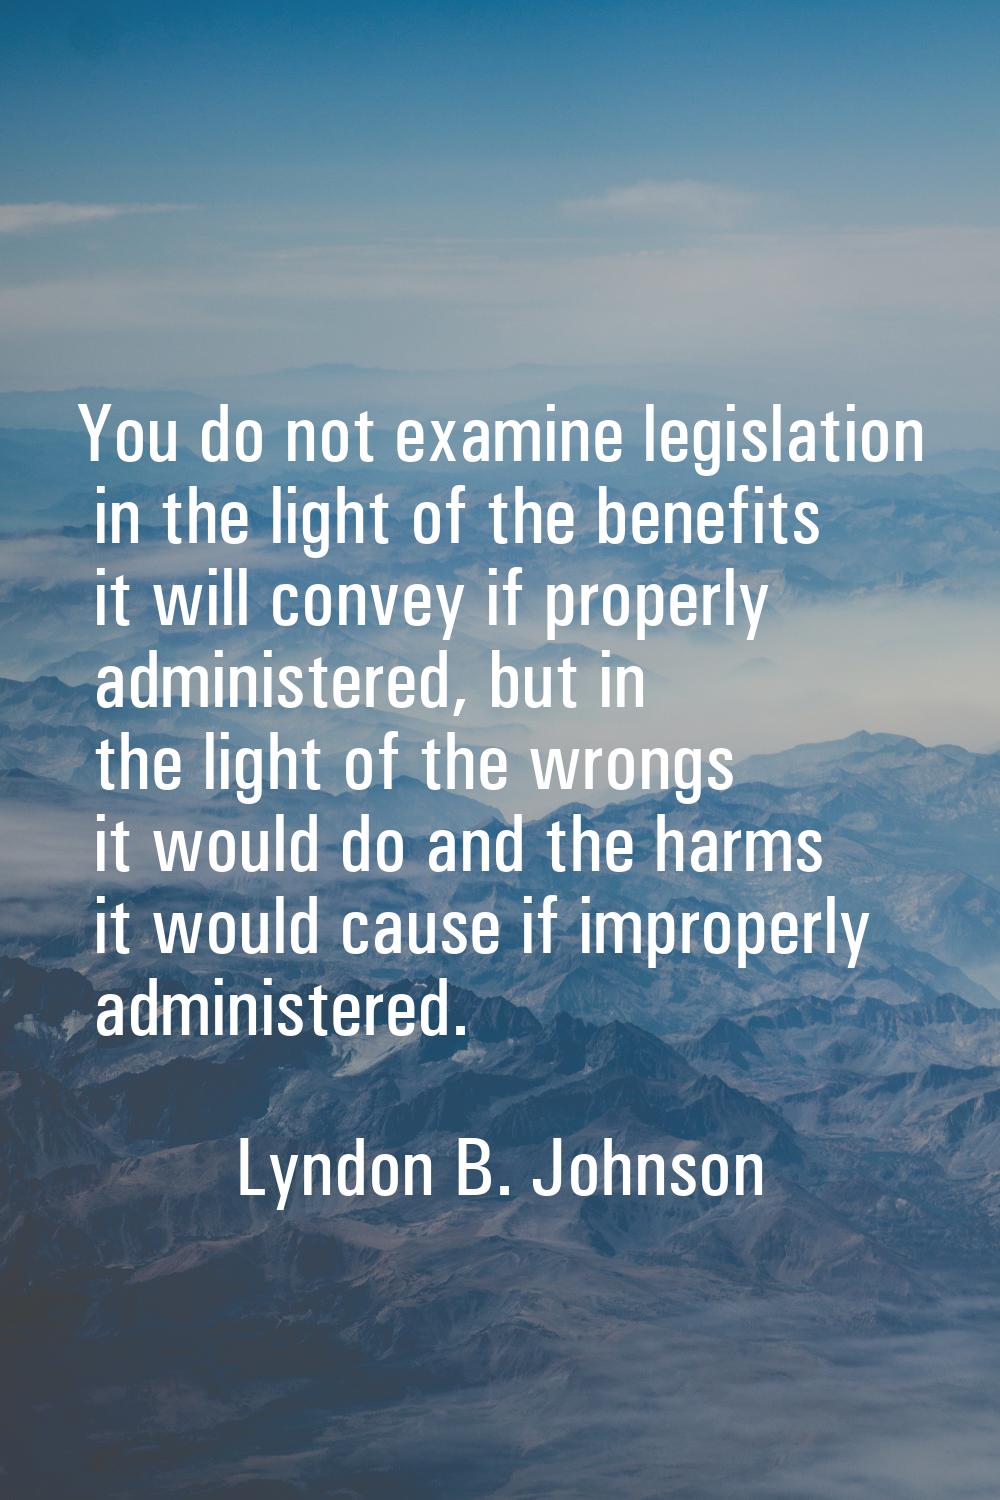 You do not examine legislation in the light of the benefits it will convey if properly administered